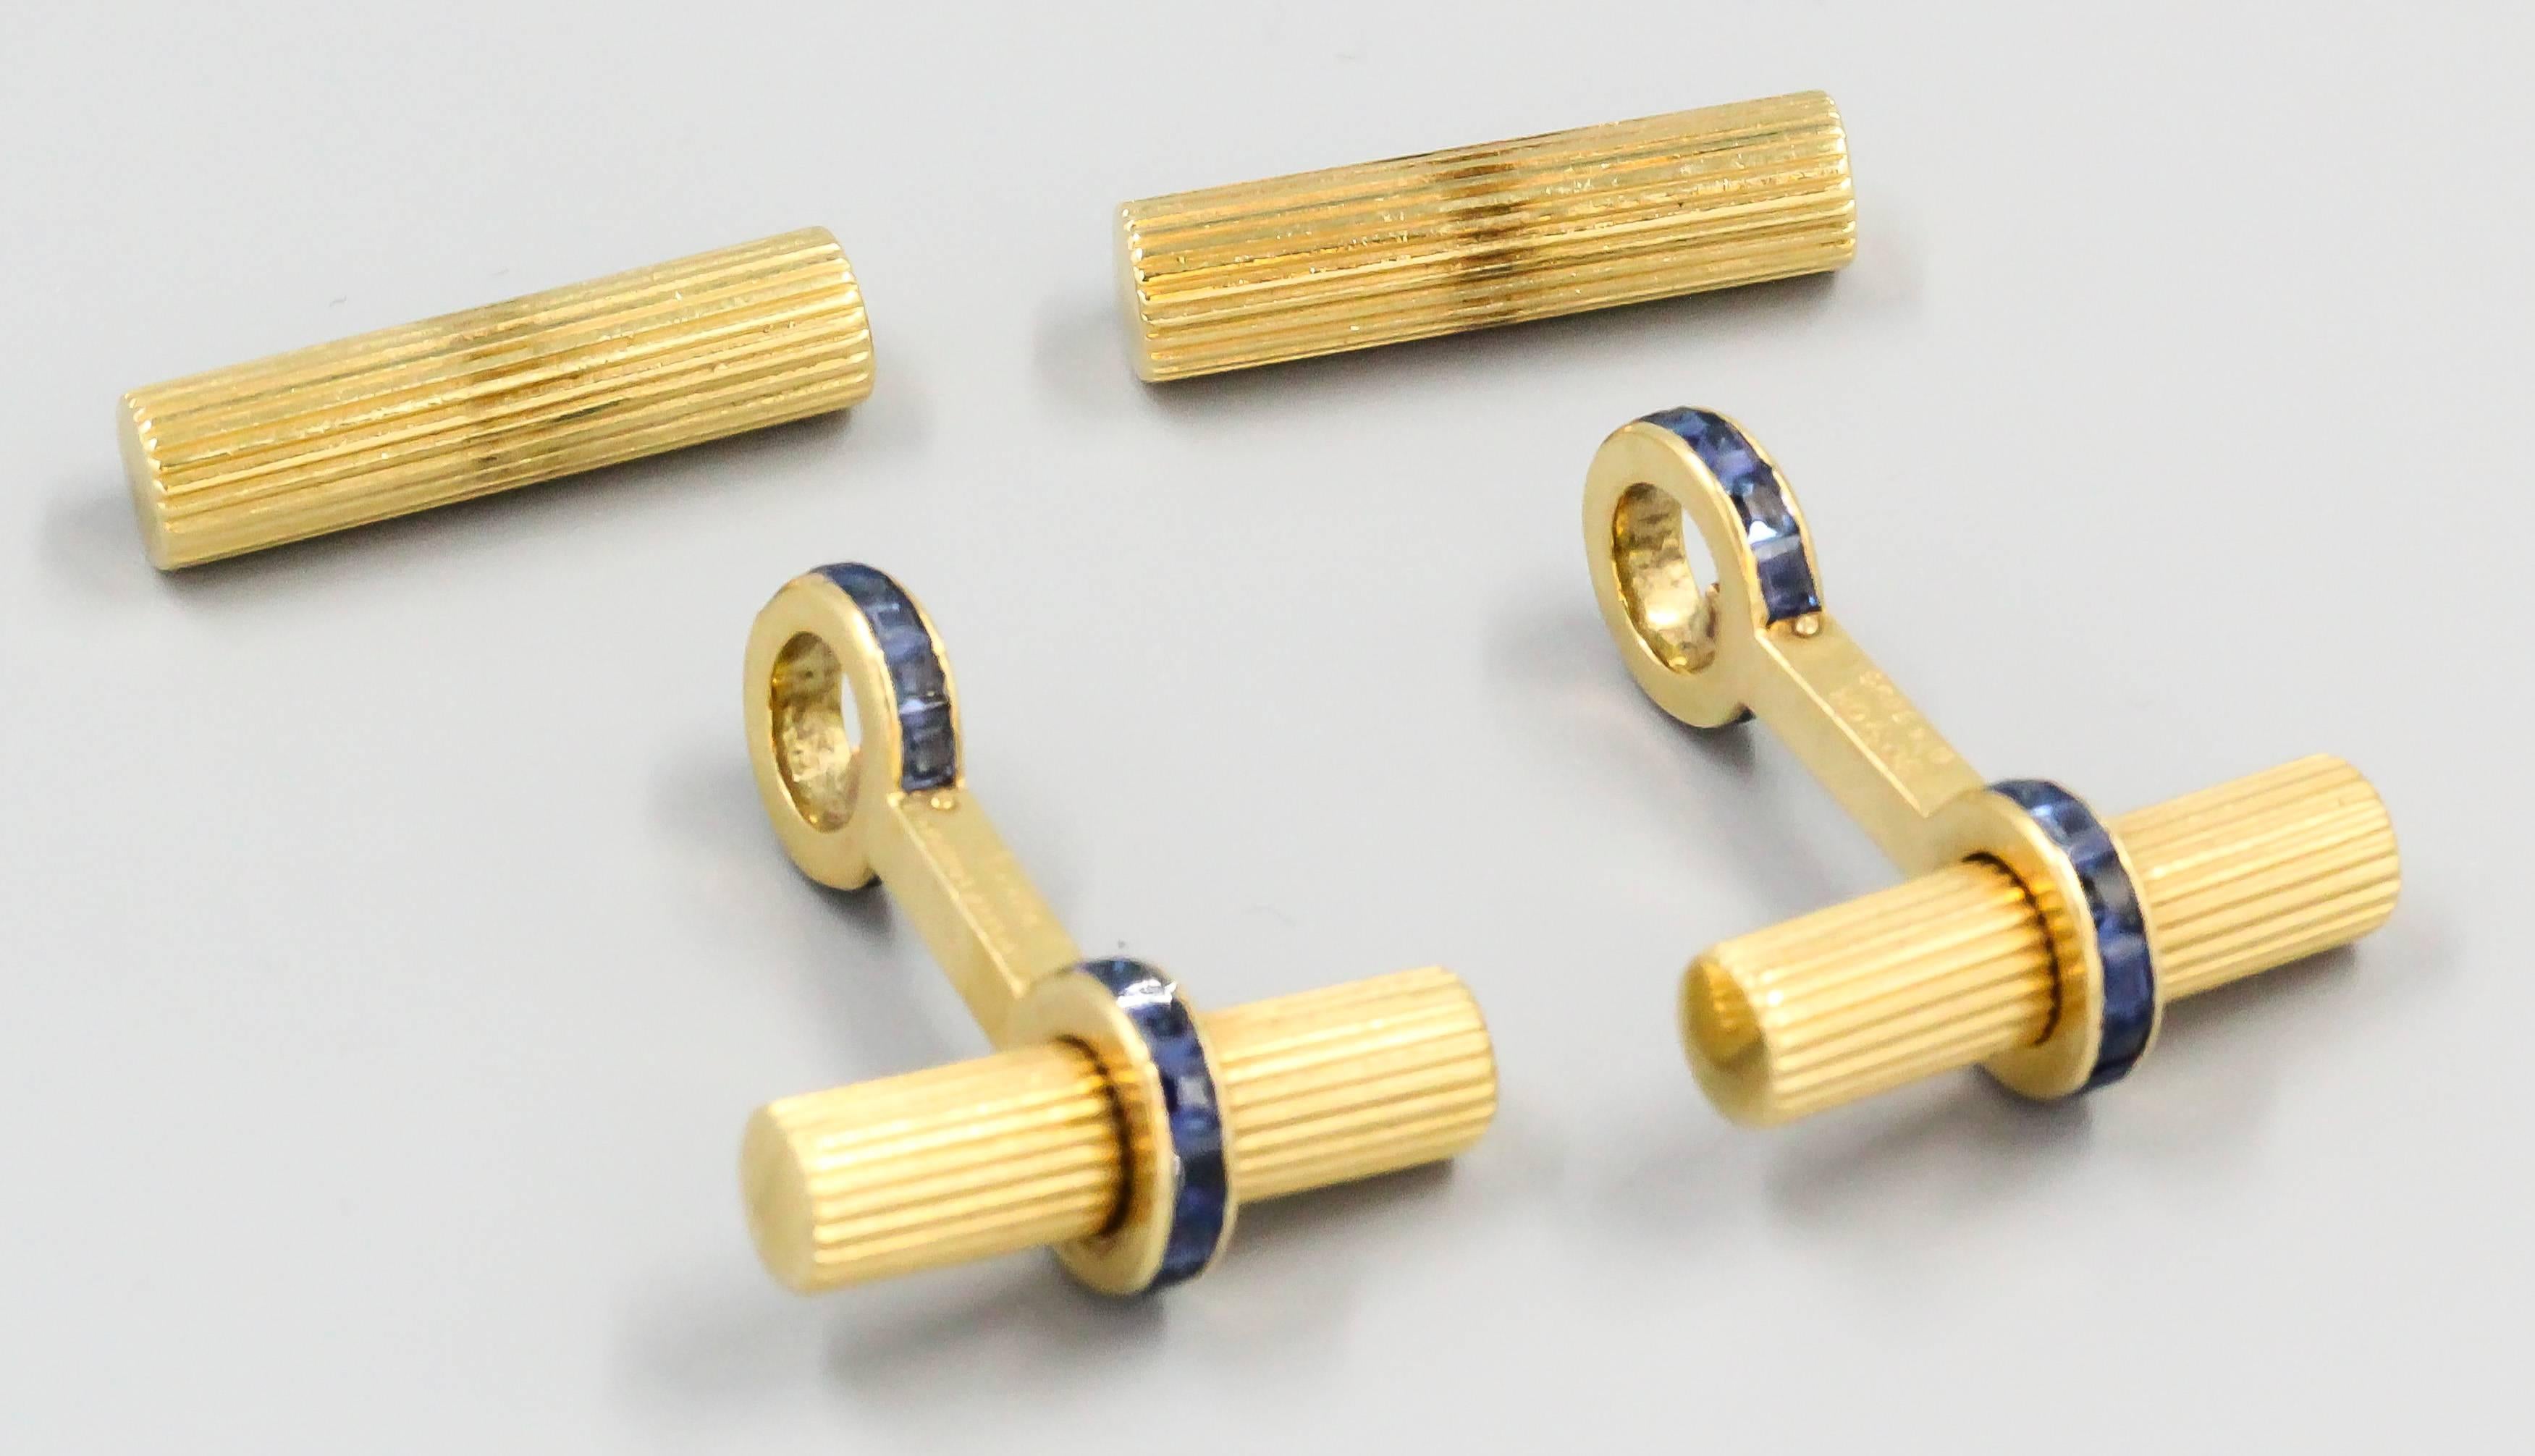 Very handsome sapphire and 18K yellow gold bar cufflinks by Van Cleef & Arpels, circa 1960s-70s. They resemble ribbed gold bars, with rich blue sapphires. One end of the bars twists off for ease of installation. 

Hallmarks: Van Cleef & Arpels,